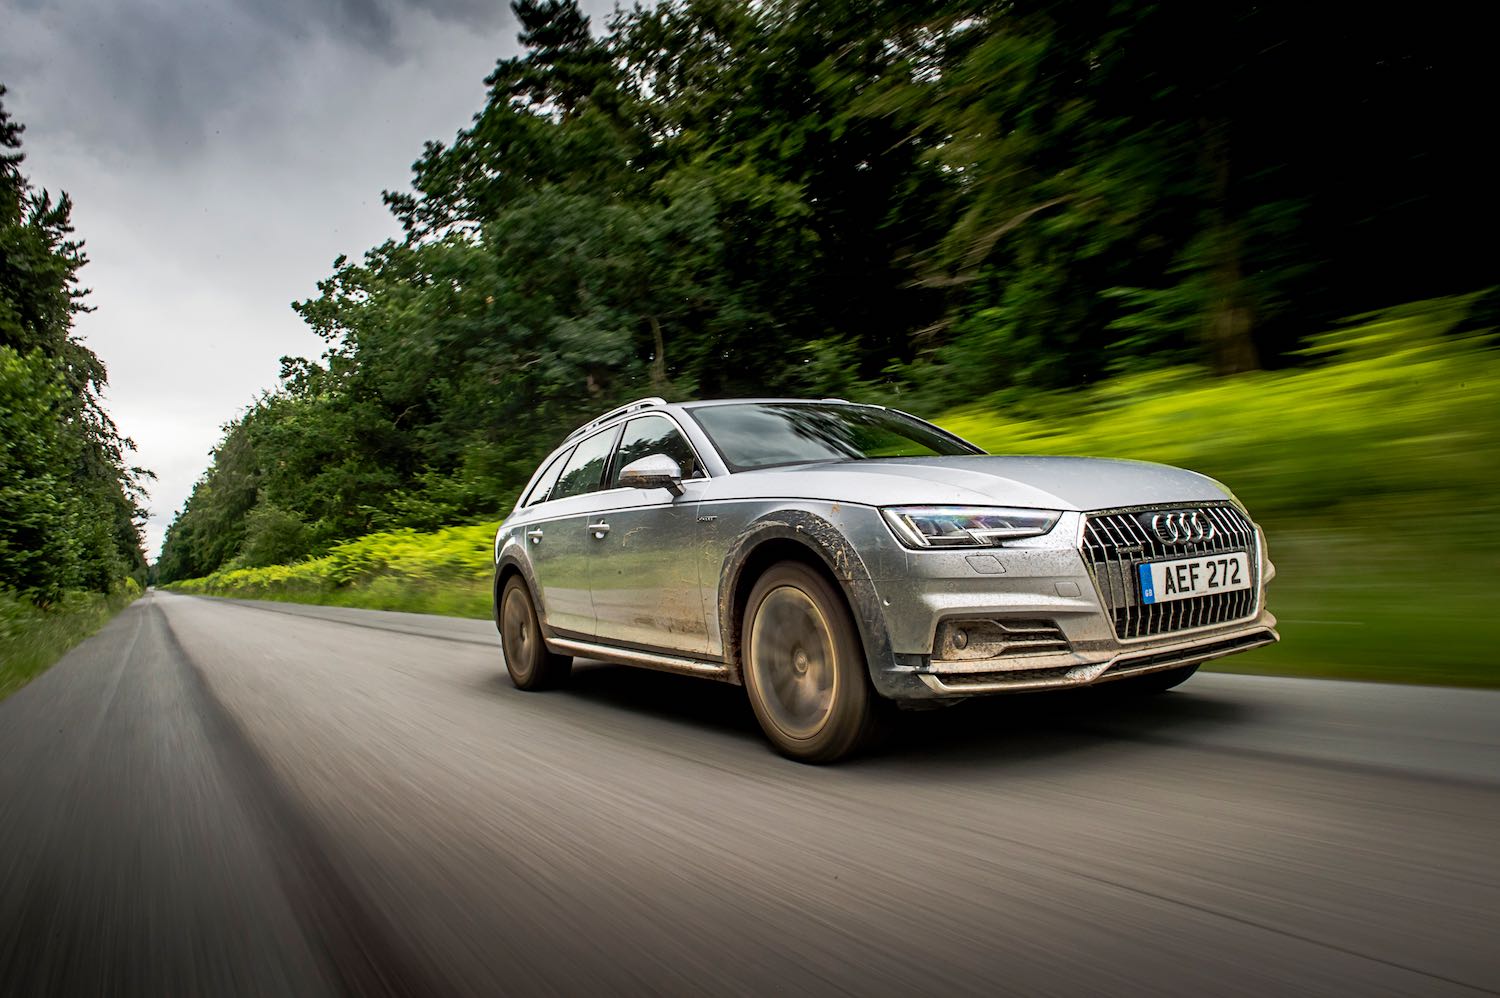 Neil Lyndon reviews the Audi Allroad for drive-7